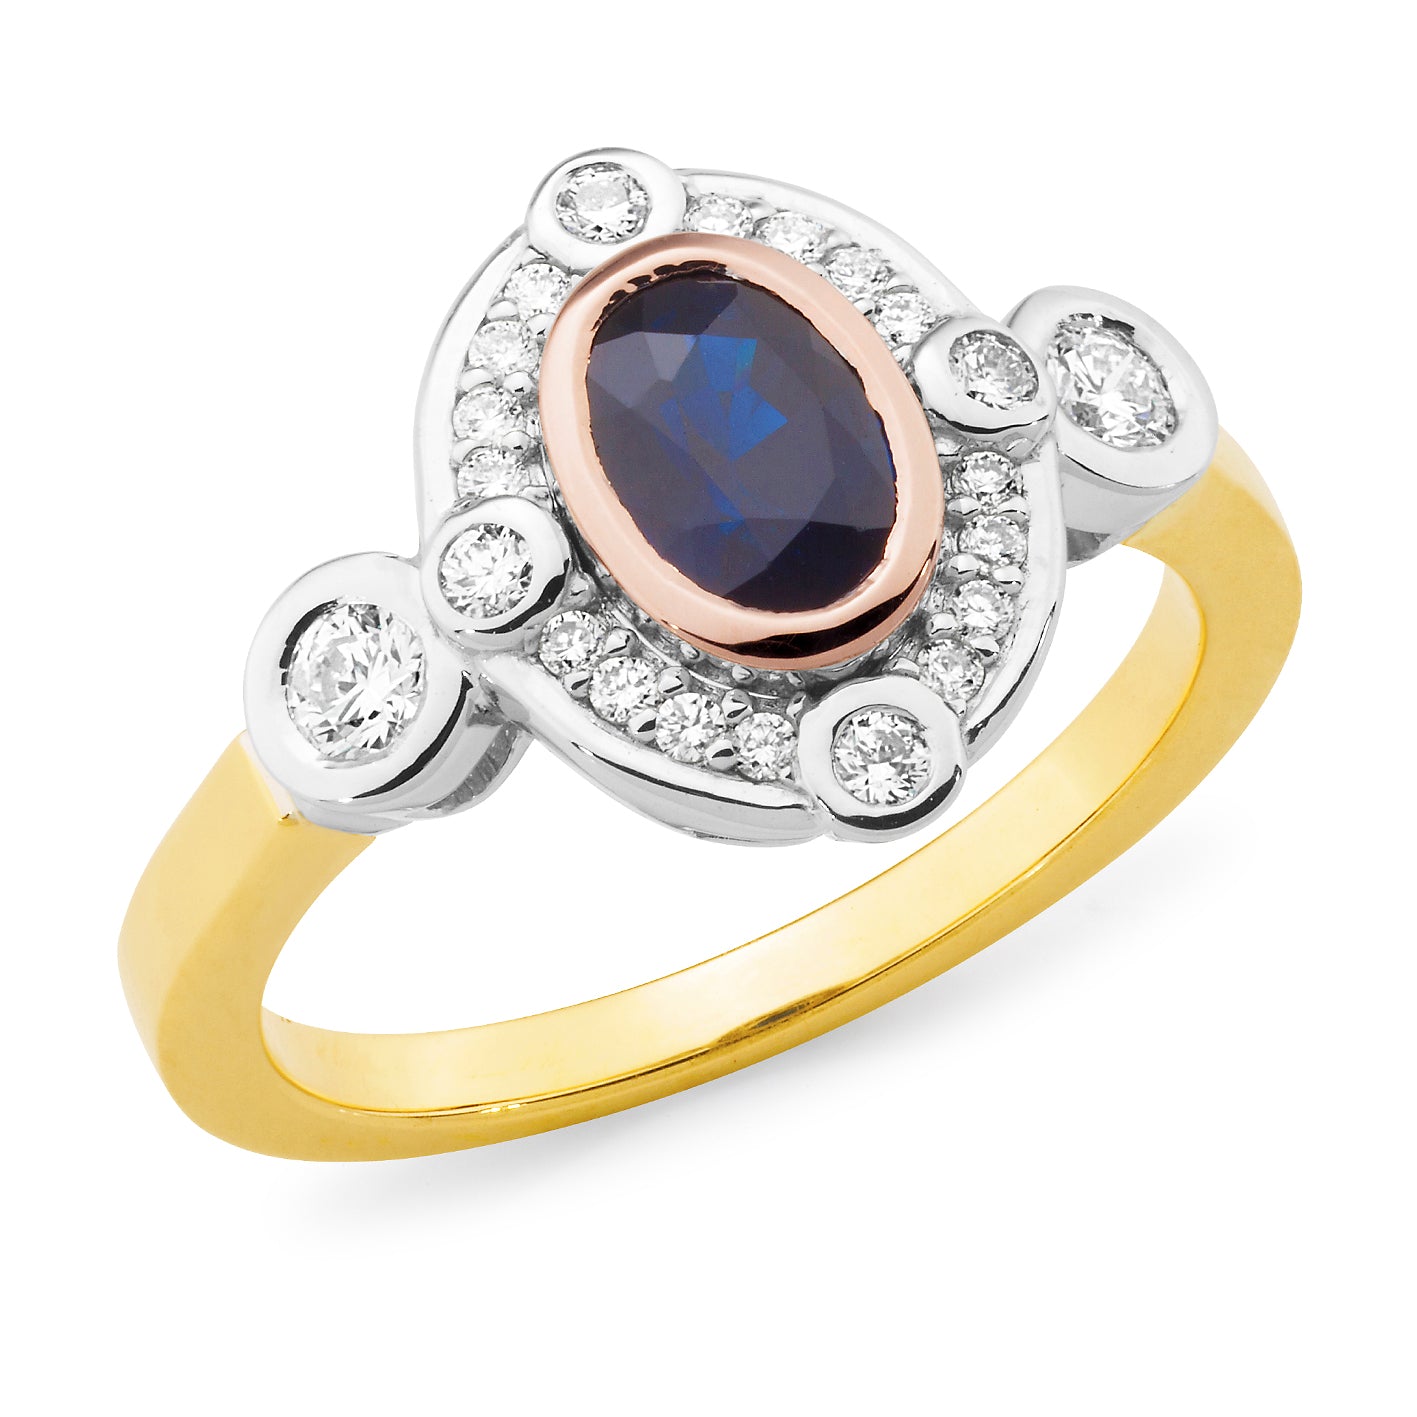 Claire' Oval Cut Sapphire & Diamond Ring in 9ct Yellow, Rose & White Gold